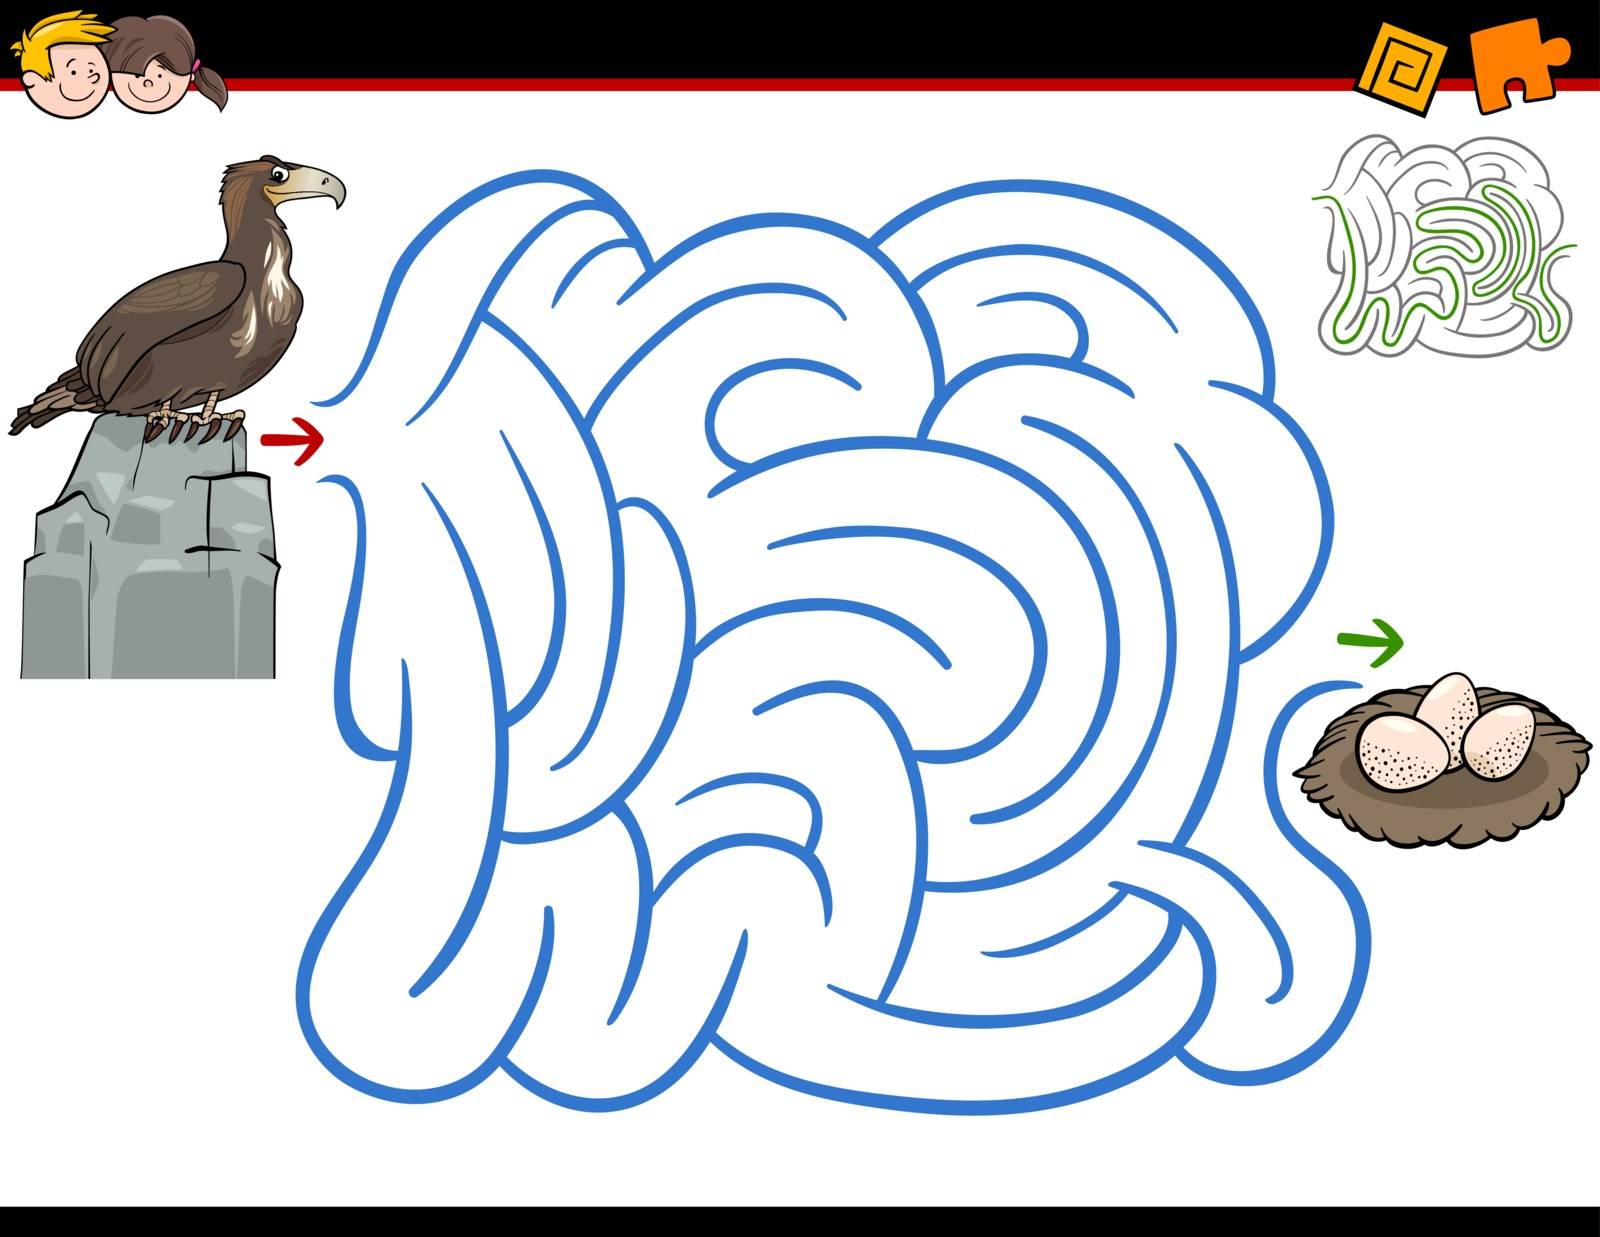 Cartoon Illustration of Education Maze or Labyrinth Activity Game for Children with Eagle and his Nest